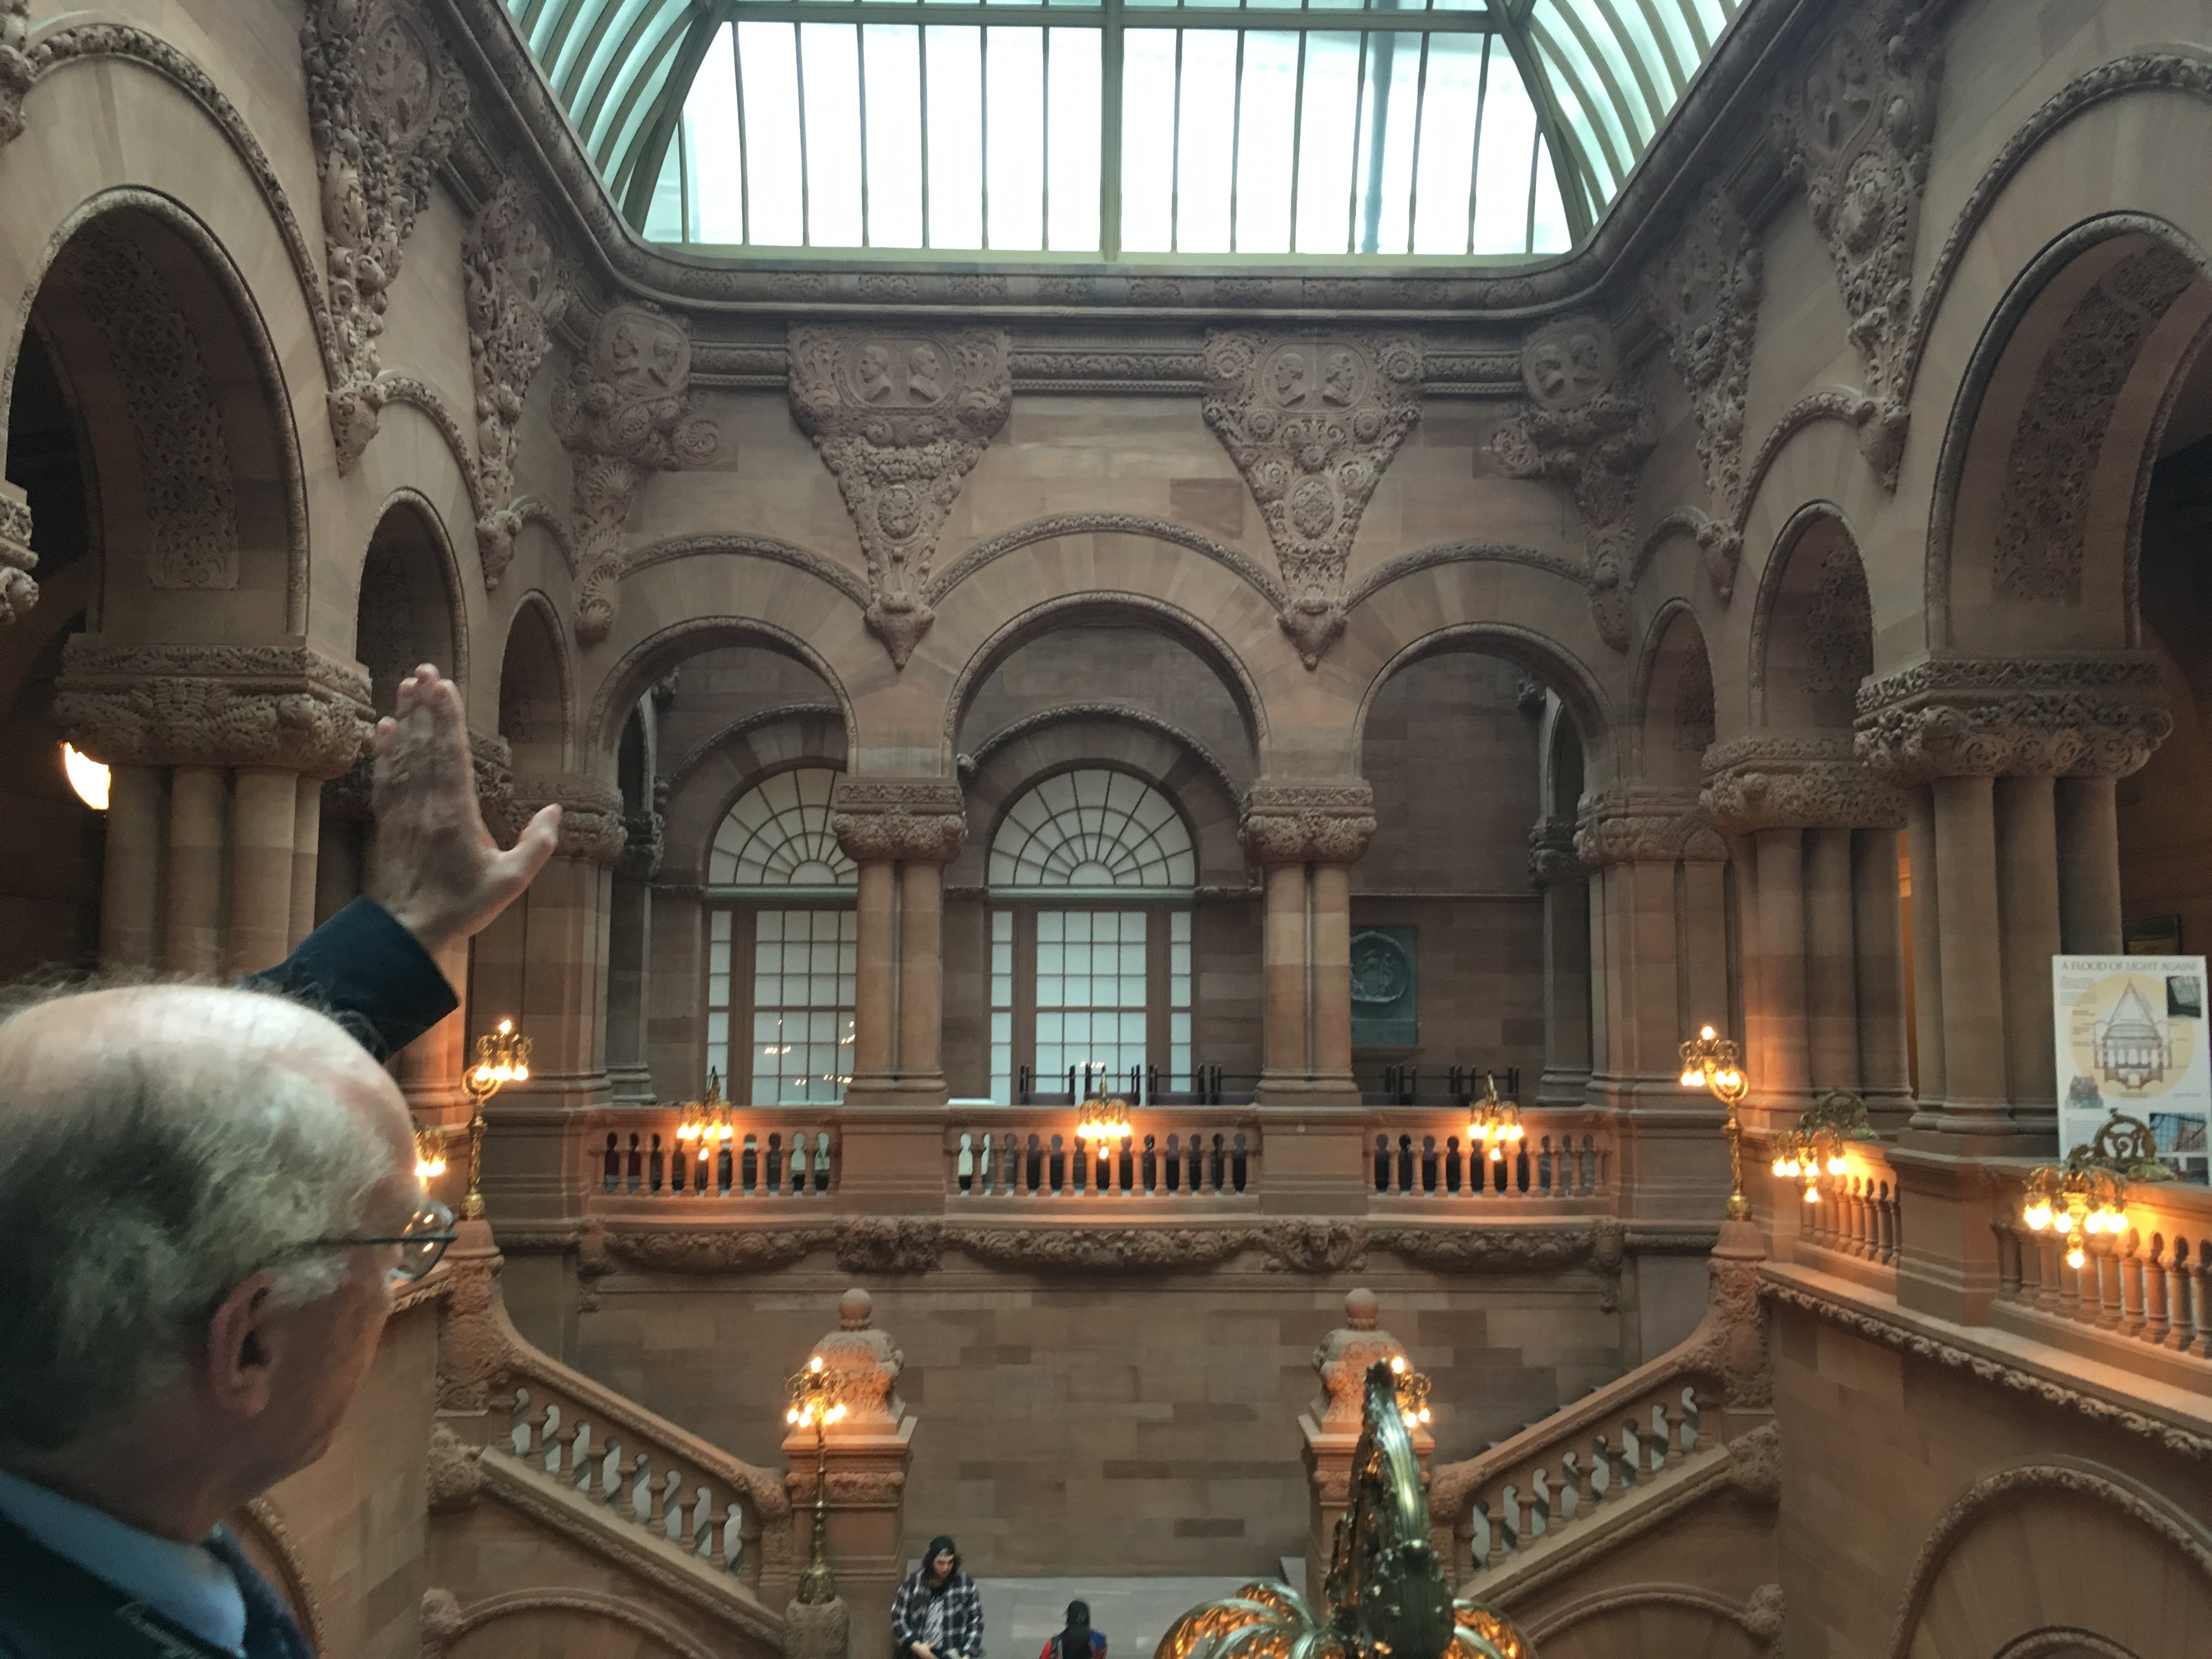 Inside the New York state capitol.